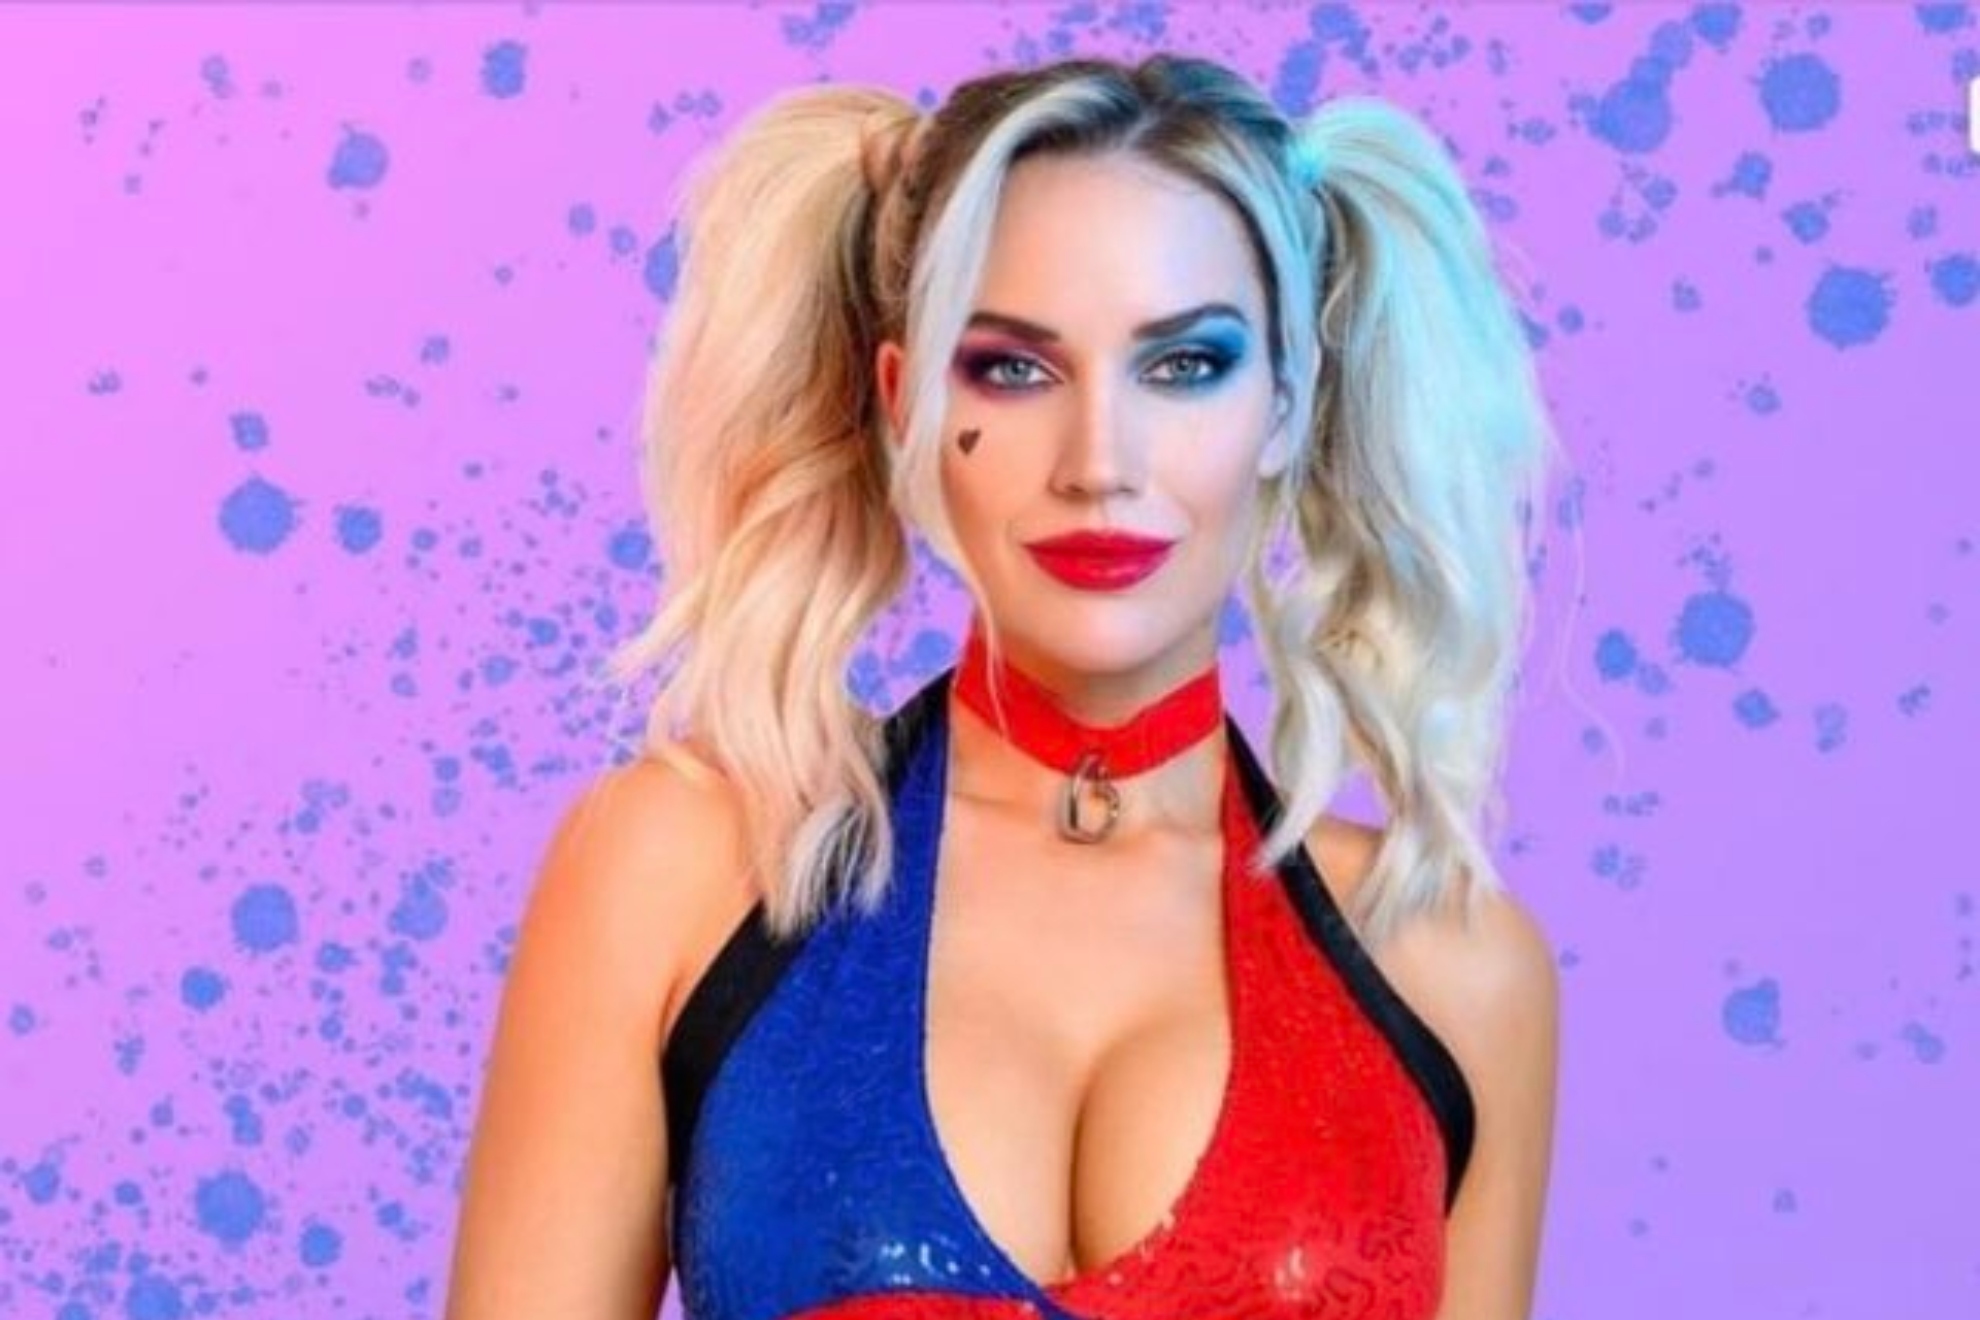 Paige Spiranac's plans for Halloween 2022 are going to set the internet on fire